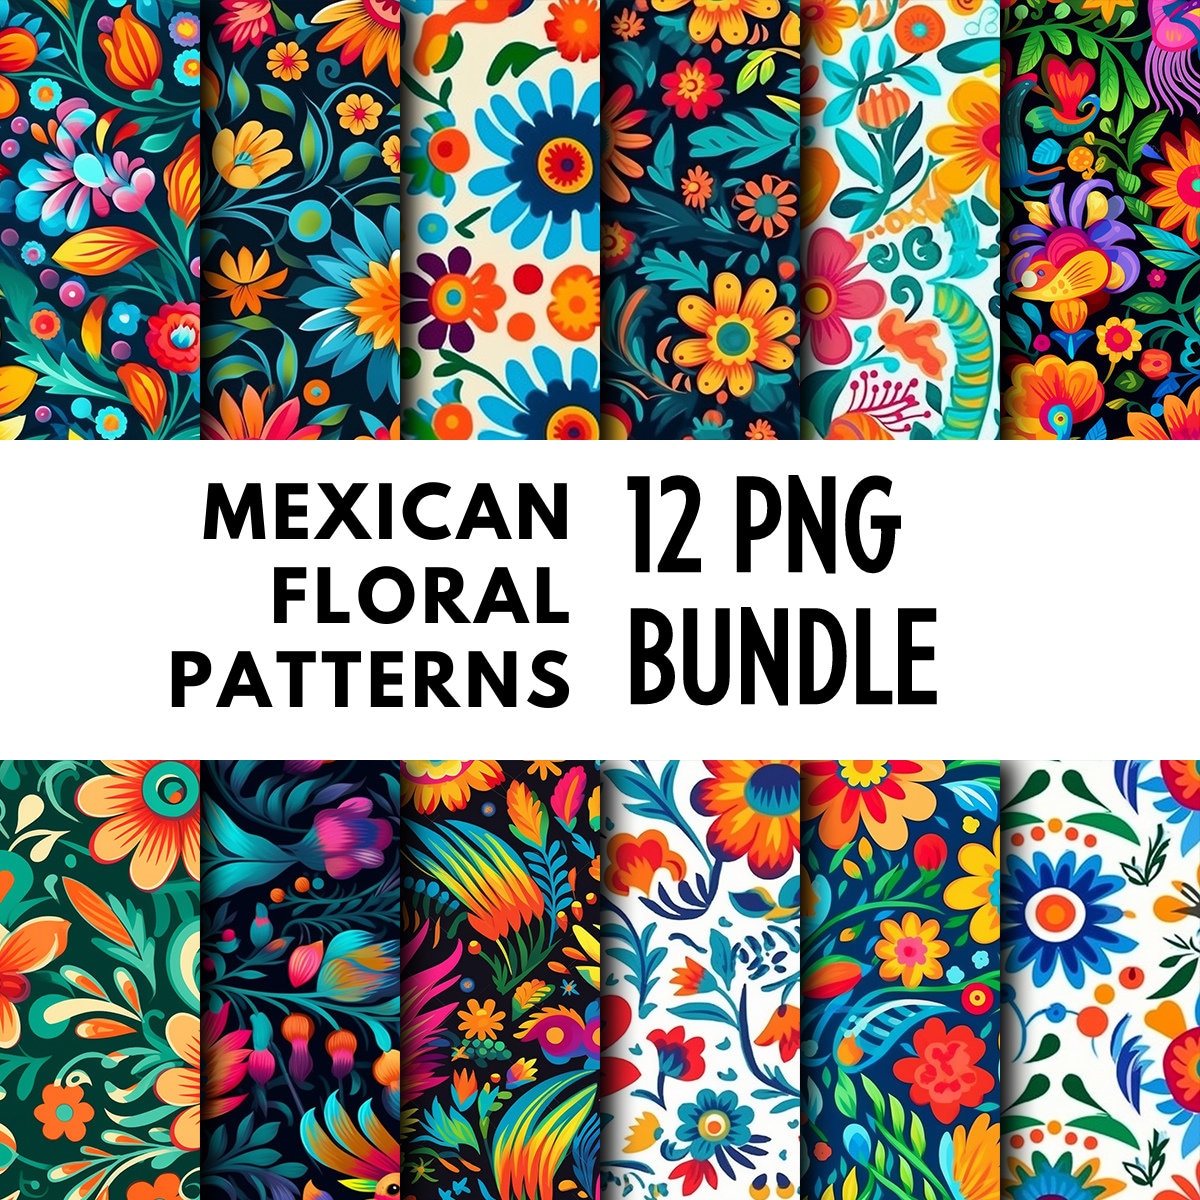 Mexican Floral Patterns 12 PNG Bundle Seamless Pattern - Etsy